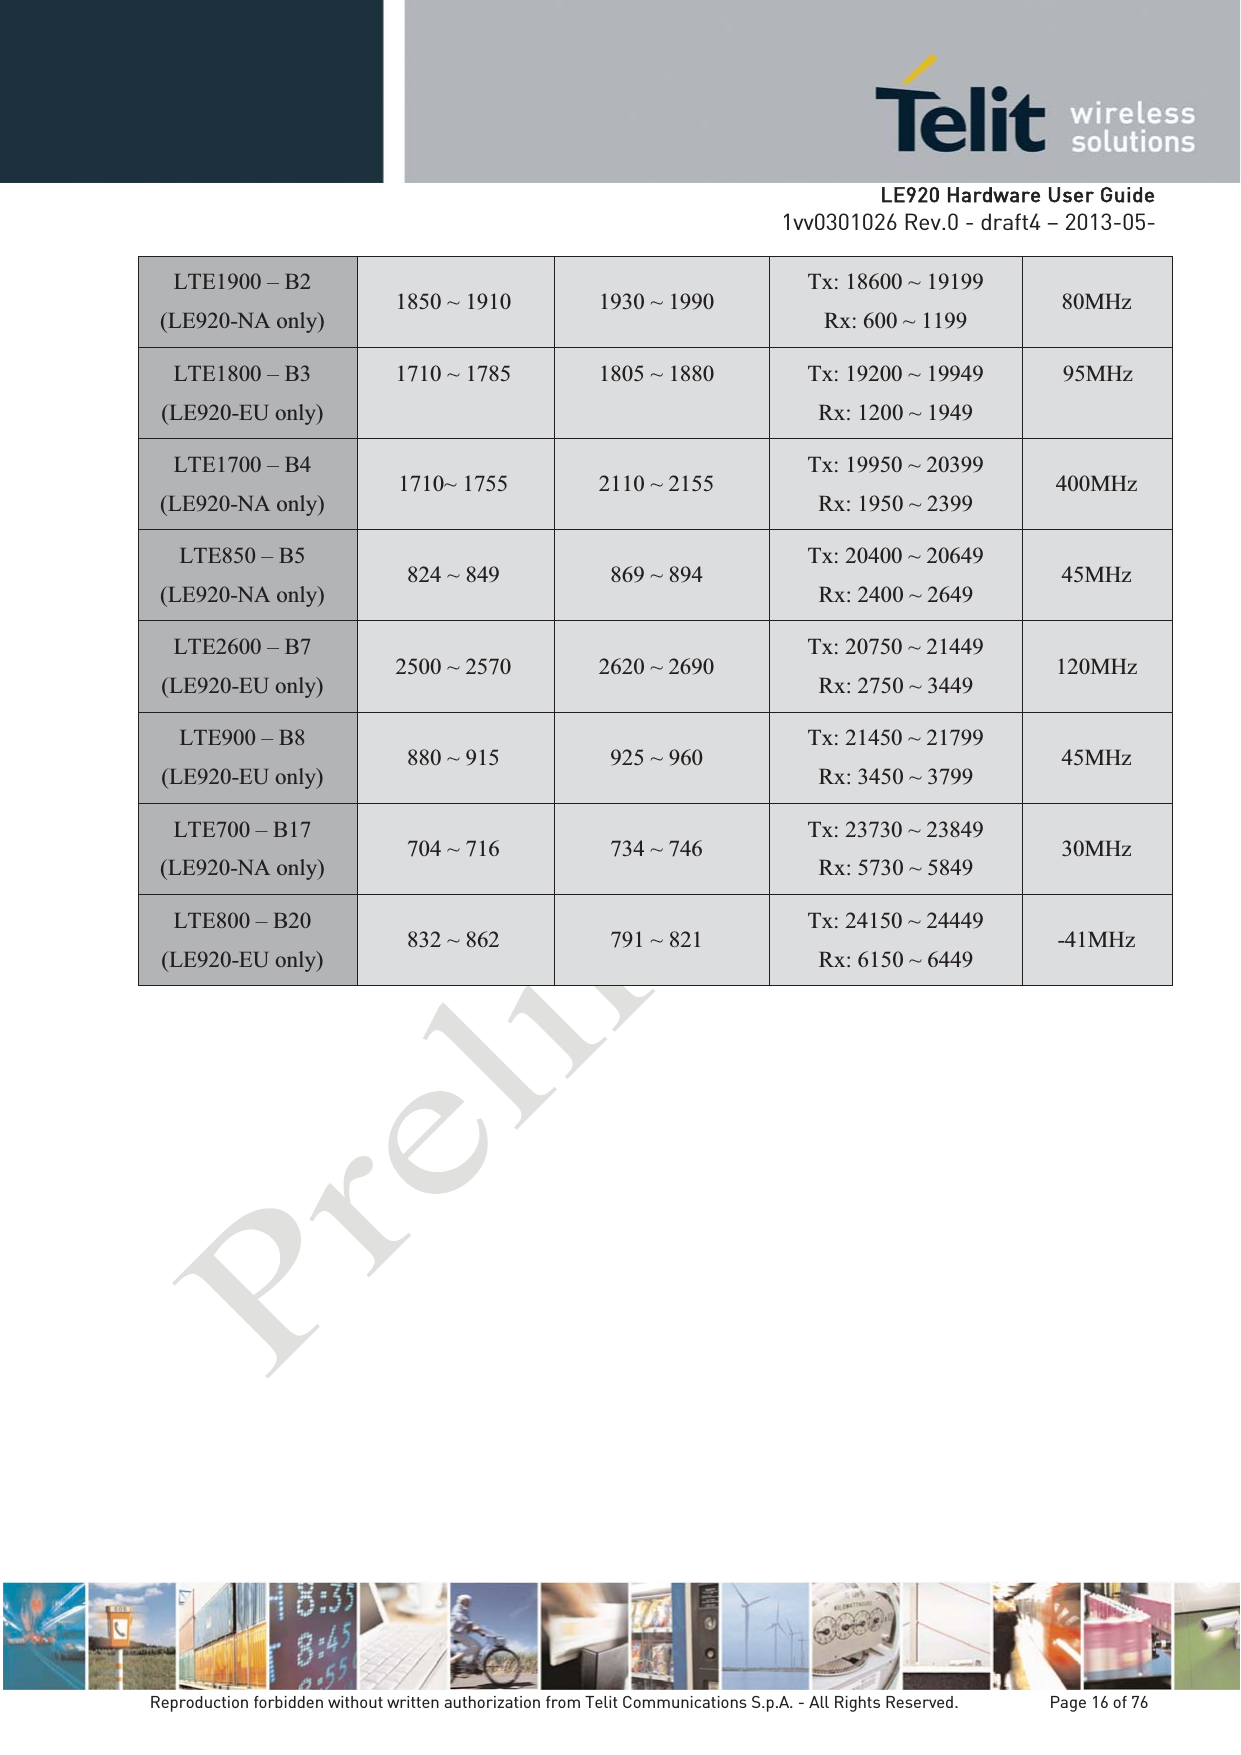   LLE920 Hardware User Guide1vv0301026 Rev.0 - draft4 – 2013-05-Reproduction forbidden without written authorization from Telit Communications S.p.A. - All Rights Reserved.    Page 16 of 76 LTE1900 – B2 (LE920-NA only)  1850 ~ 1910  1930 ~ 1990  Tx: 18600 ~ 19199 Rx: 600 ~ 1199  80MHz LTE1800 – B3 (LE920-EU only) 1710 ~ 1785  1805 ~ 1880  Tx: 19200 ~ 19949 Rx: 1200 ~ 1949 95MHz LTE1700 – B4 (LE920-NA only)  1710~ 1755  2110 ~ 2155  Tx: 19950 ~ 20399 Rx: 1950 ~ 2399  400MHz LTE850 – B5 (LE920-NA only)  824 ~ 849  869 ~ 894  Tx: 20400 ~ 20649 Rx: 2400 ~ 2649  45MHz LTE2600 – B7 (LE920-EU only)  2500 ~ 2570  2620 ~ 2690  Tx: 20750 ~ 21449 Rx: 2750 ~ 3449  120MHz LTE900 – B8 (LE920-EU only)  880 ~ 915  925 ~ 960  Tx: 21450 ~ 21799 Rx: 3450 ~ 3799  45MHz LTE700 – B17 (LE920-NA only)  704 ~ 716 734 ~ 746 Tx: 23730 ~ 23849 Rx: 5730 ~ 5849  30MHzLTE800 – B20 (LE920-EU only)  832 ~ 862  791 ~ 821  Tx: 24150 ~ 24449 Rx: 6150 ~ 6449  -41MHz 